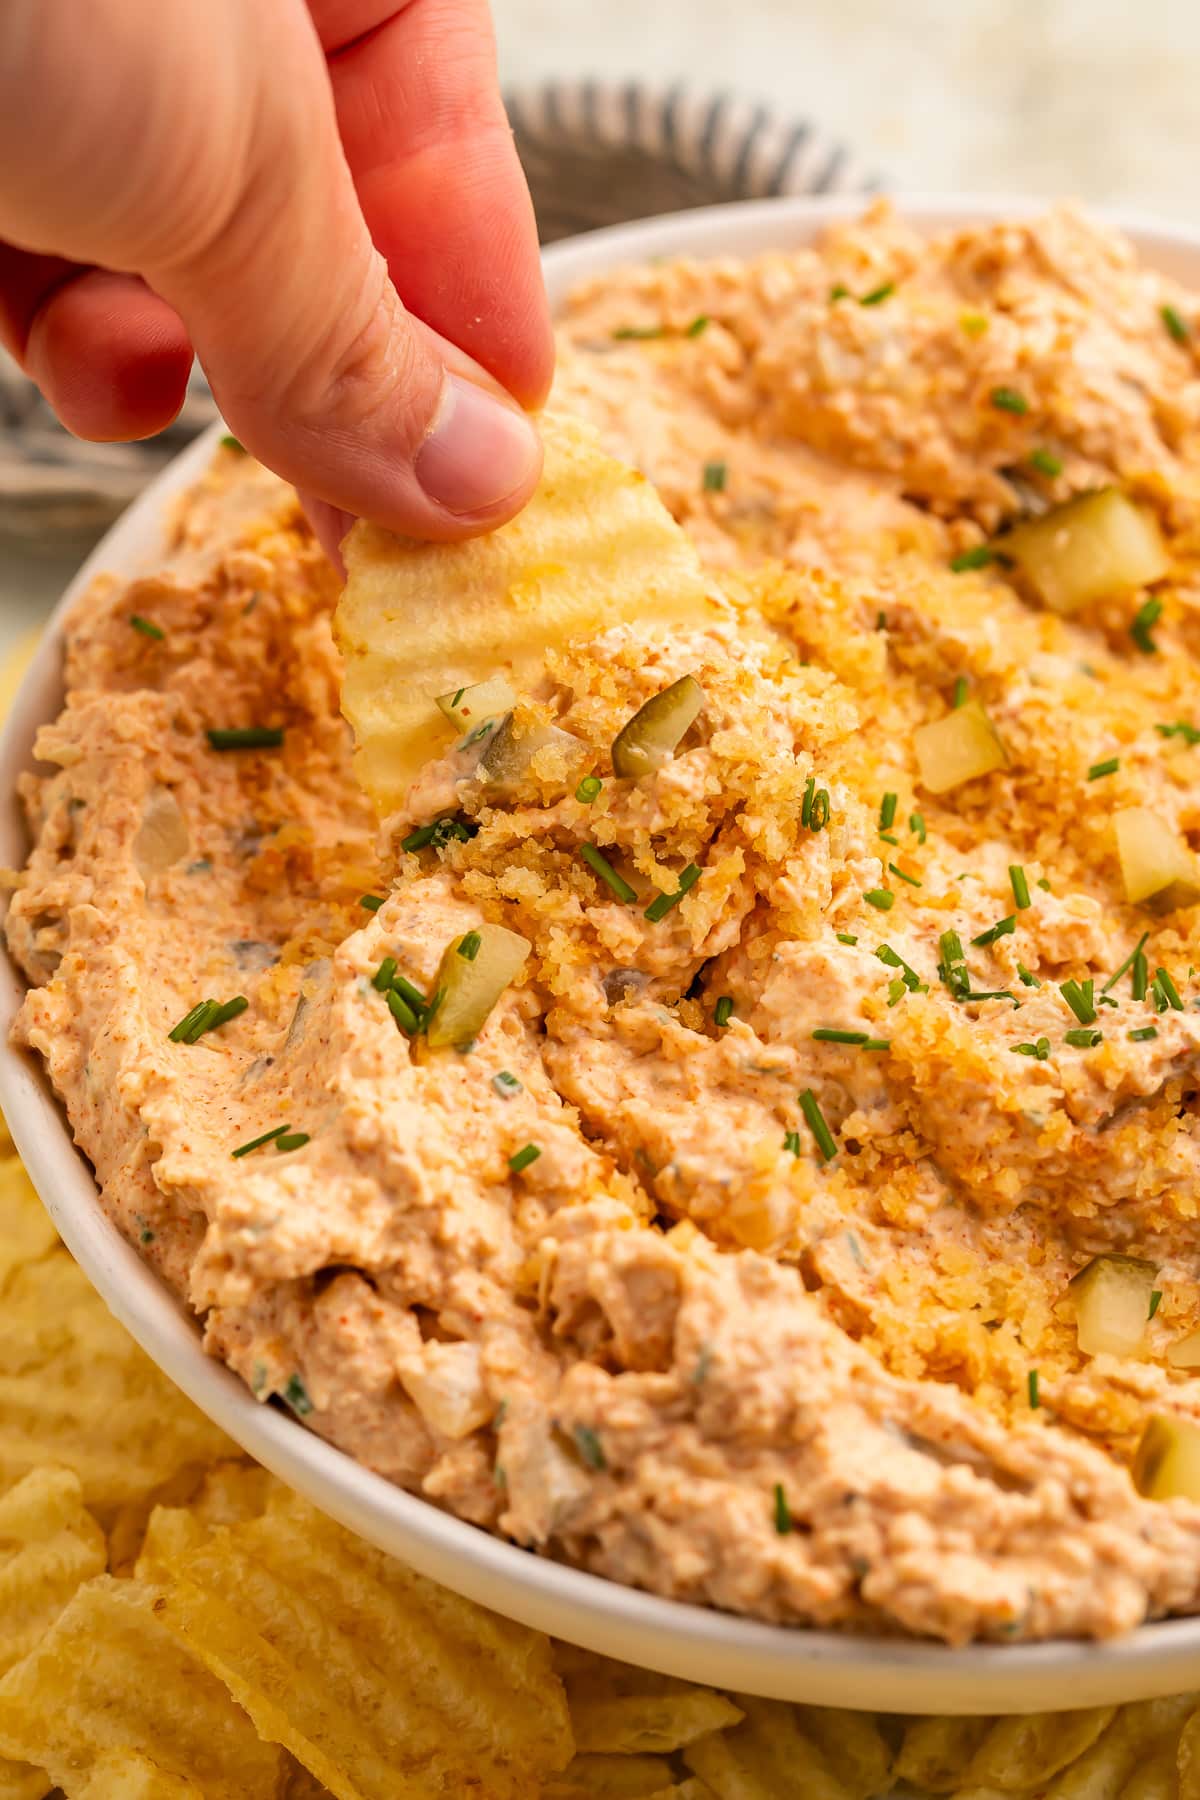 A white woman's hand holds a ridged potato chip, using it to scoop Nashville hot chicken dip out of a large bowl.